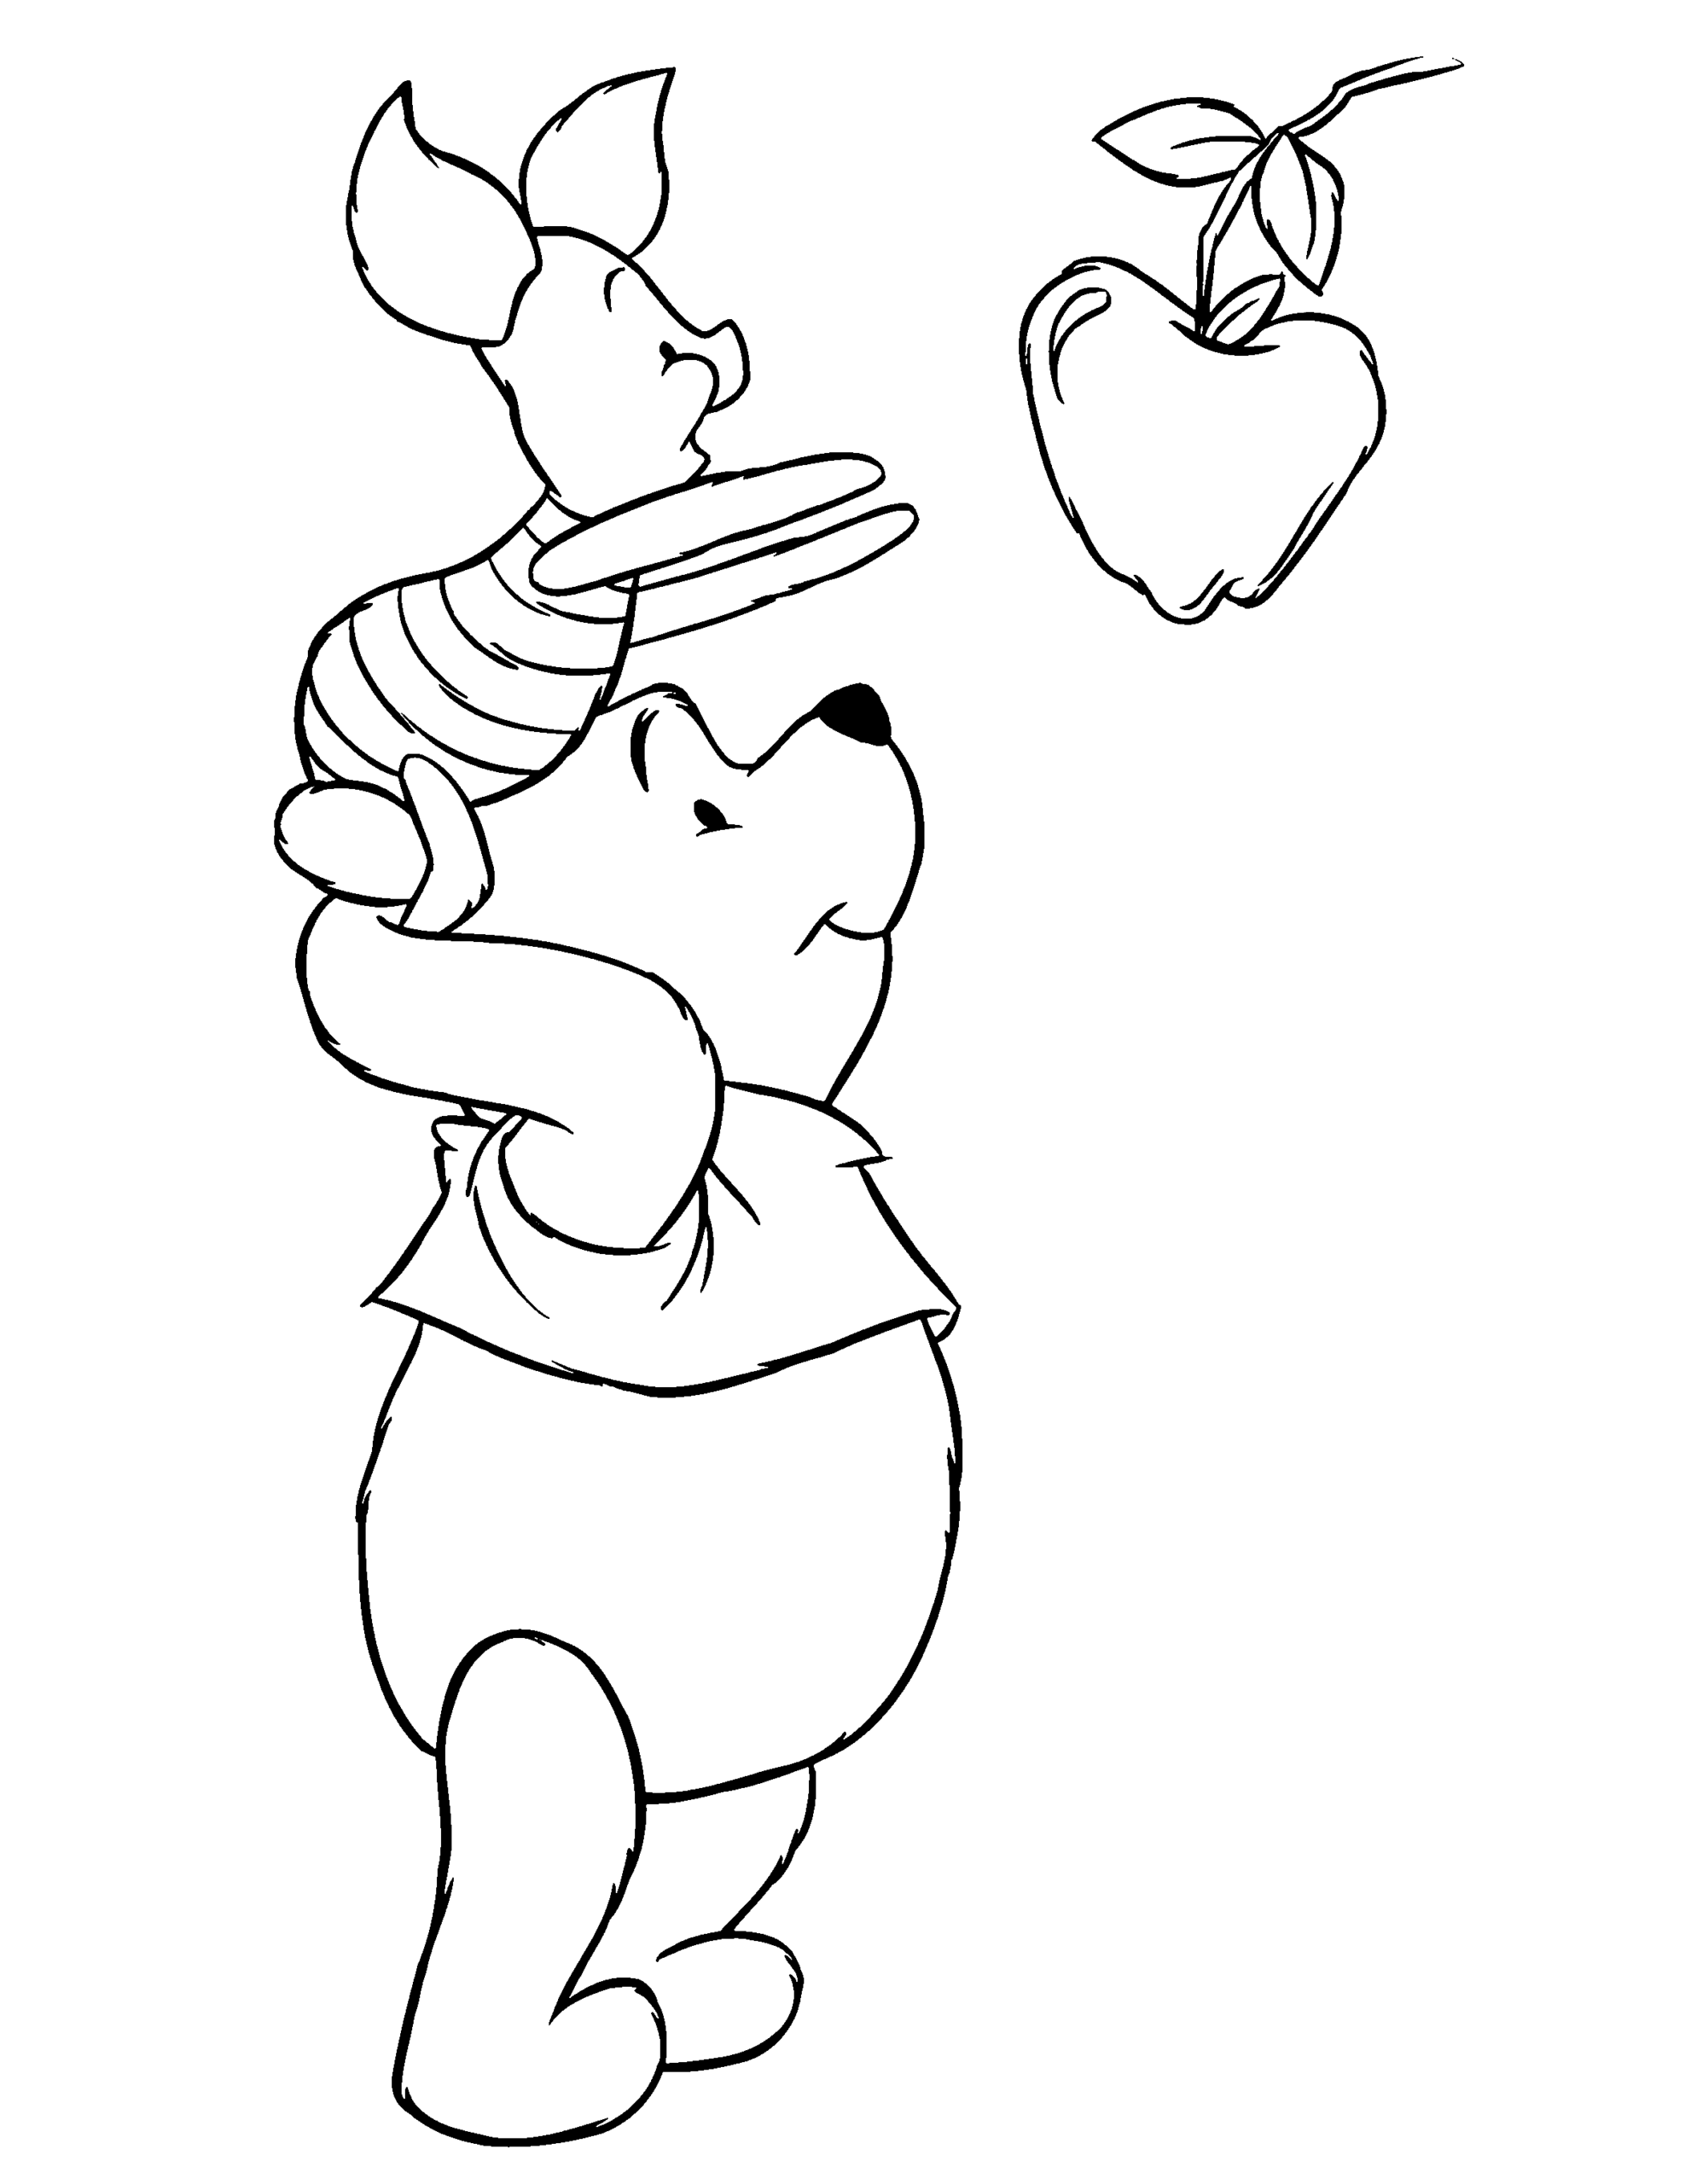 Winnie the Pooh Coloring Pages Cartoons winnie the pooh 43 Printable 2020 7150 Coloring4free